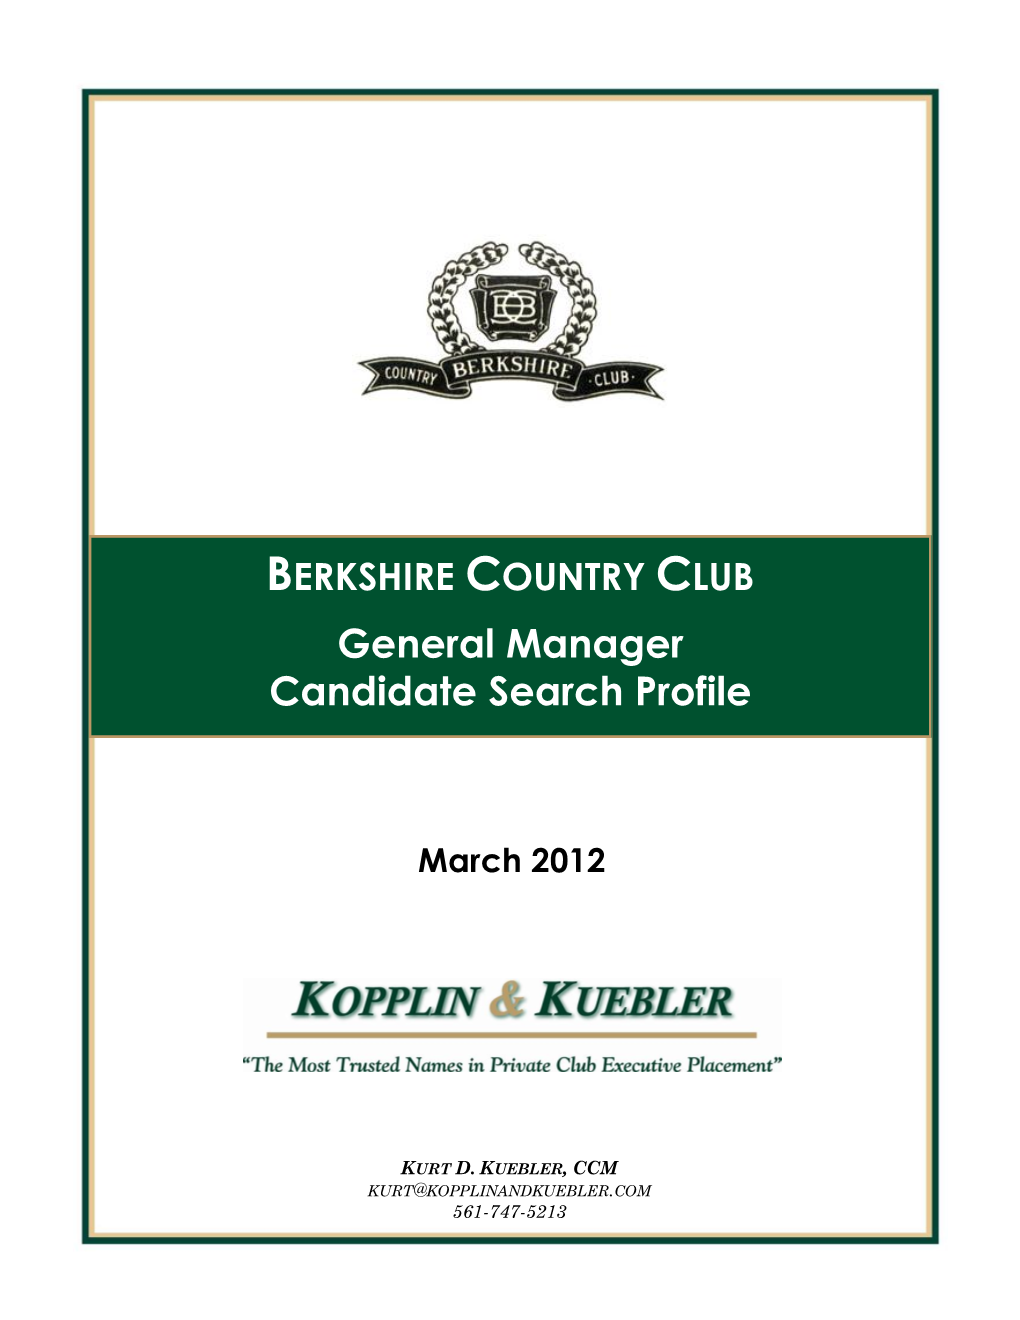 BERKSHIRE COUNTRY CLUB General Manager Candidate Search Profile